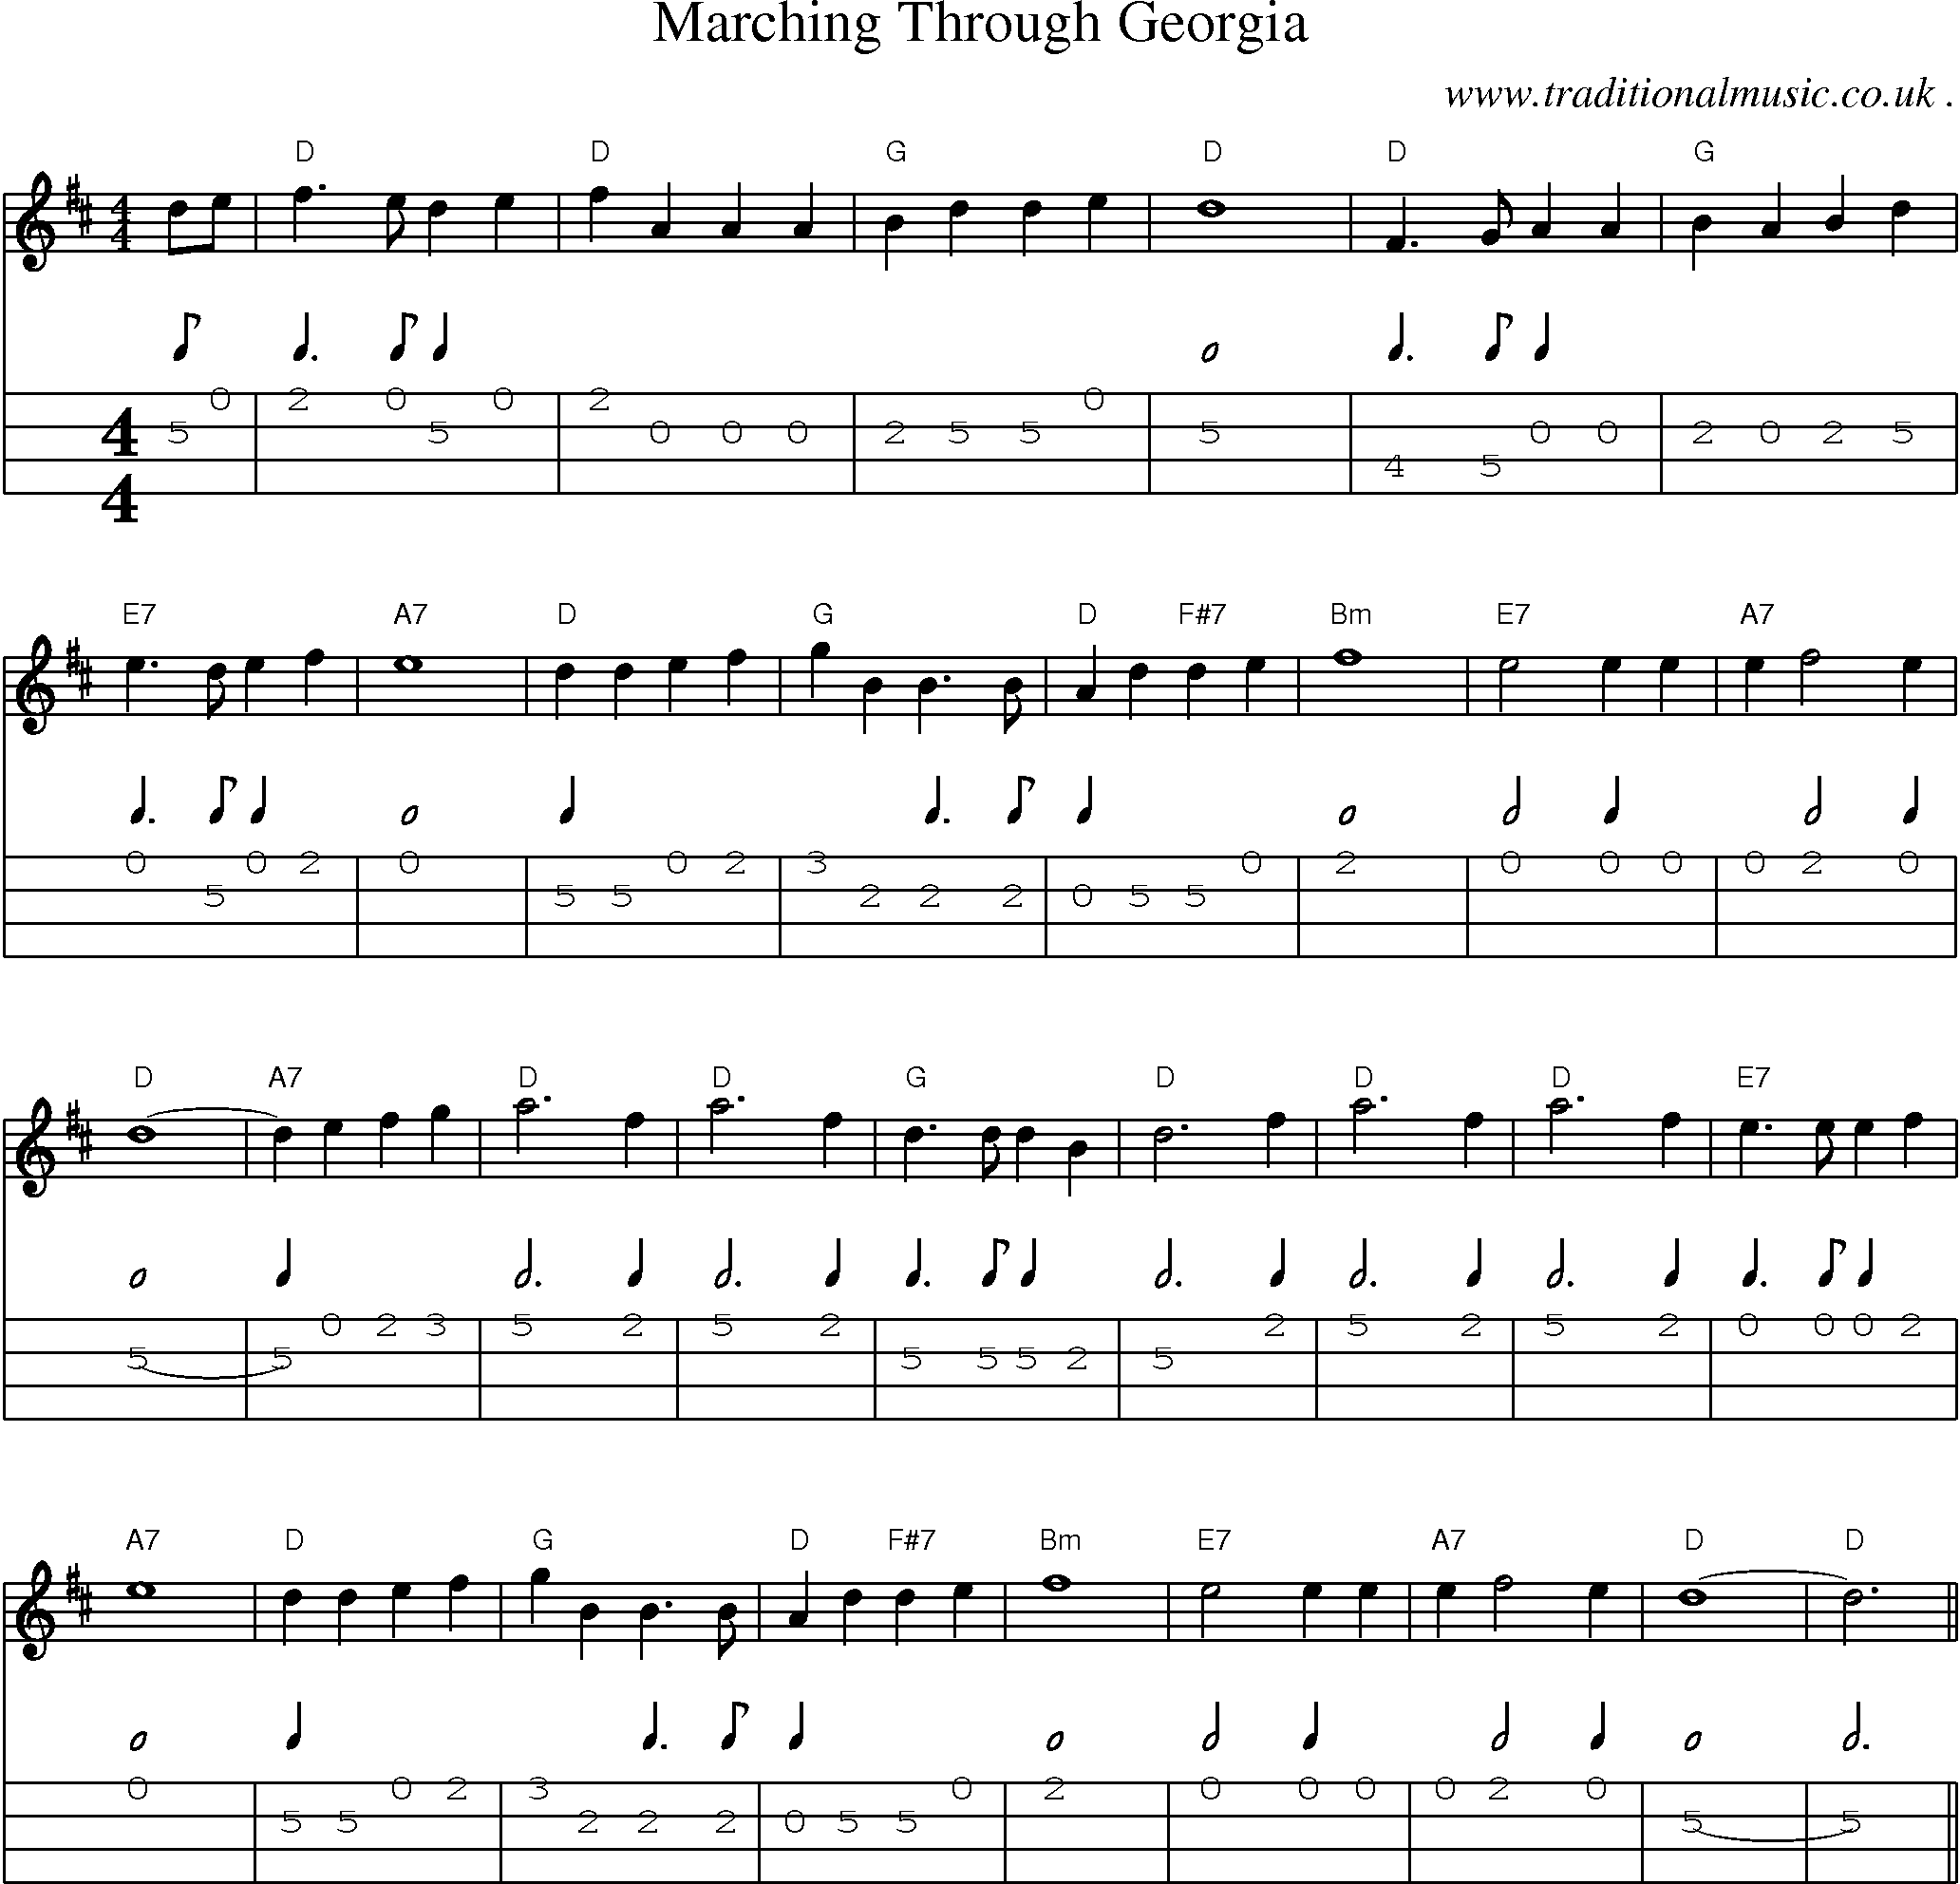 Music Score and Mandolin Tabs for Marching Through Georgia